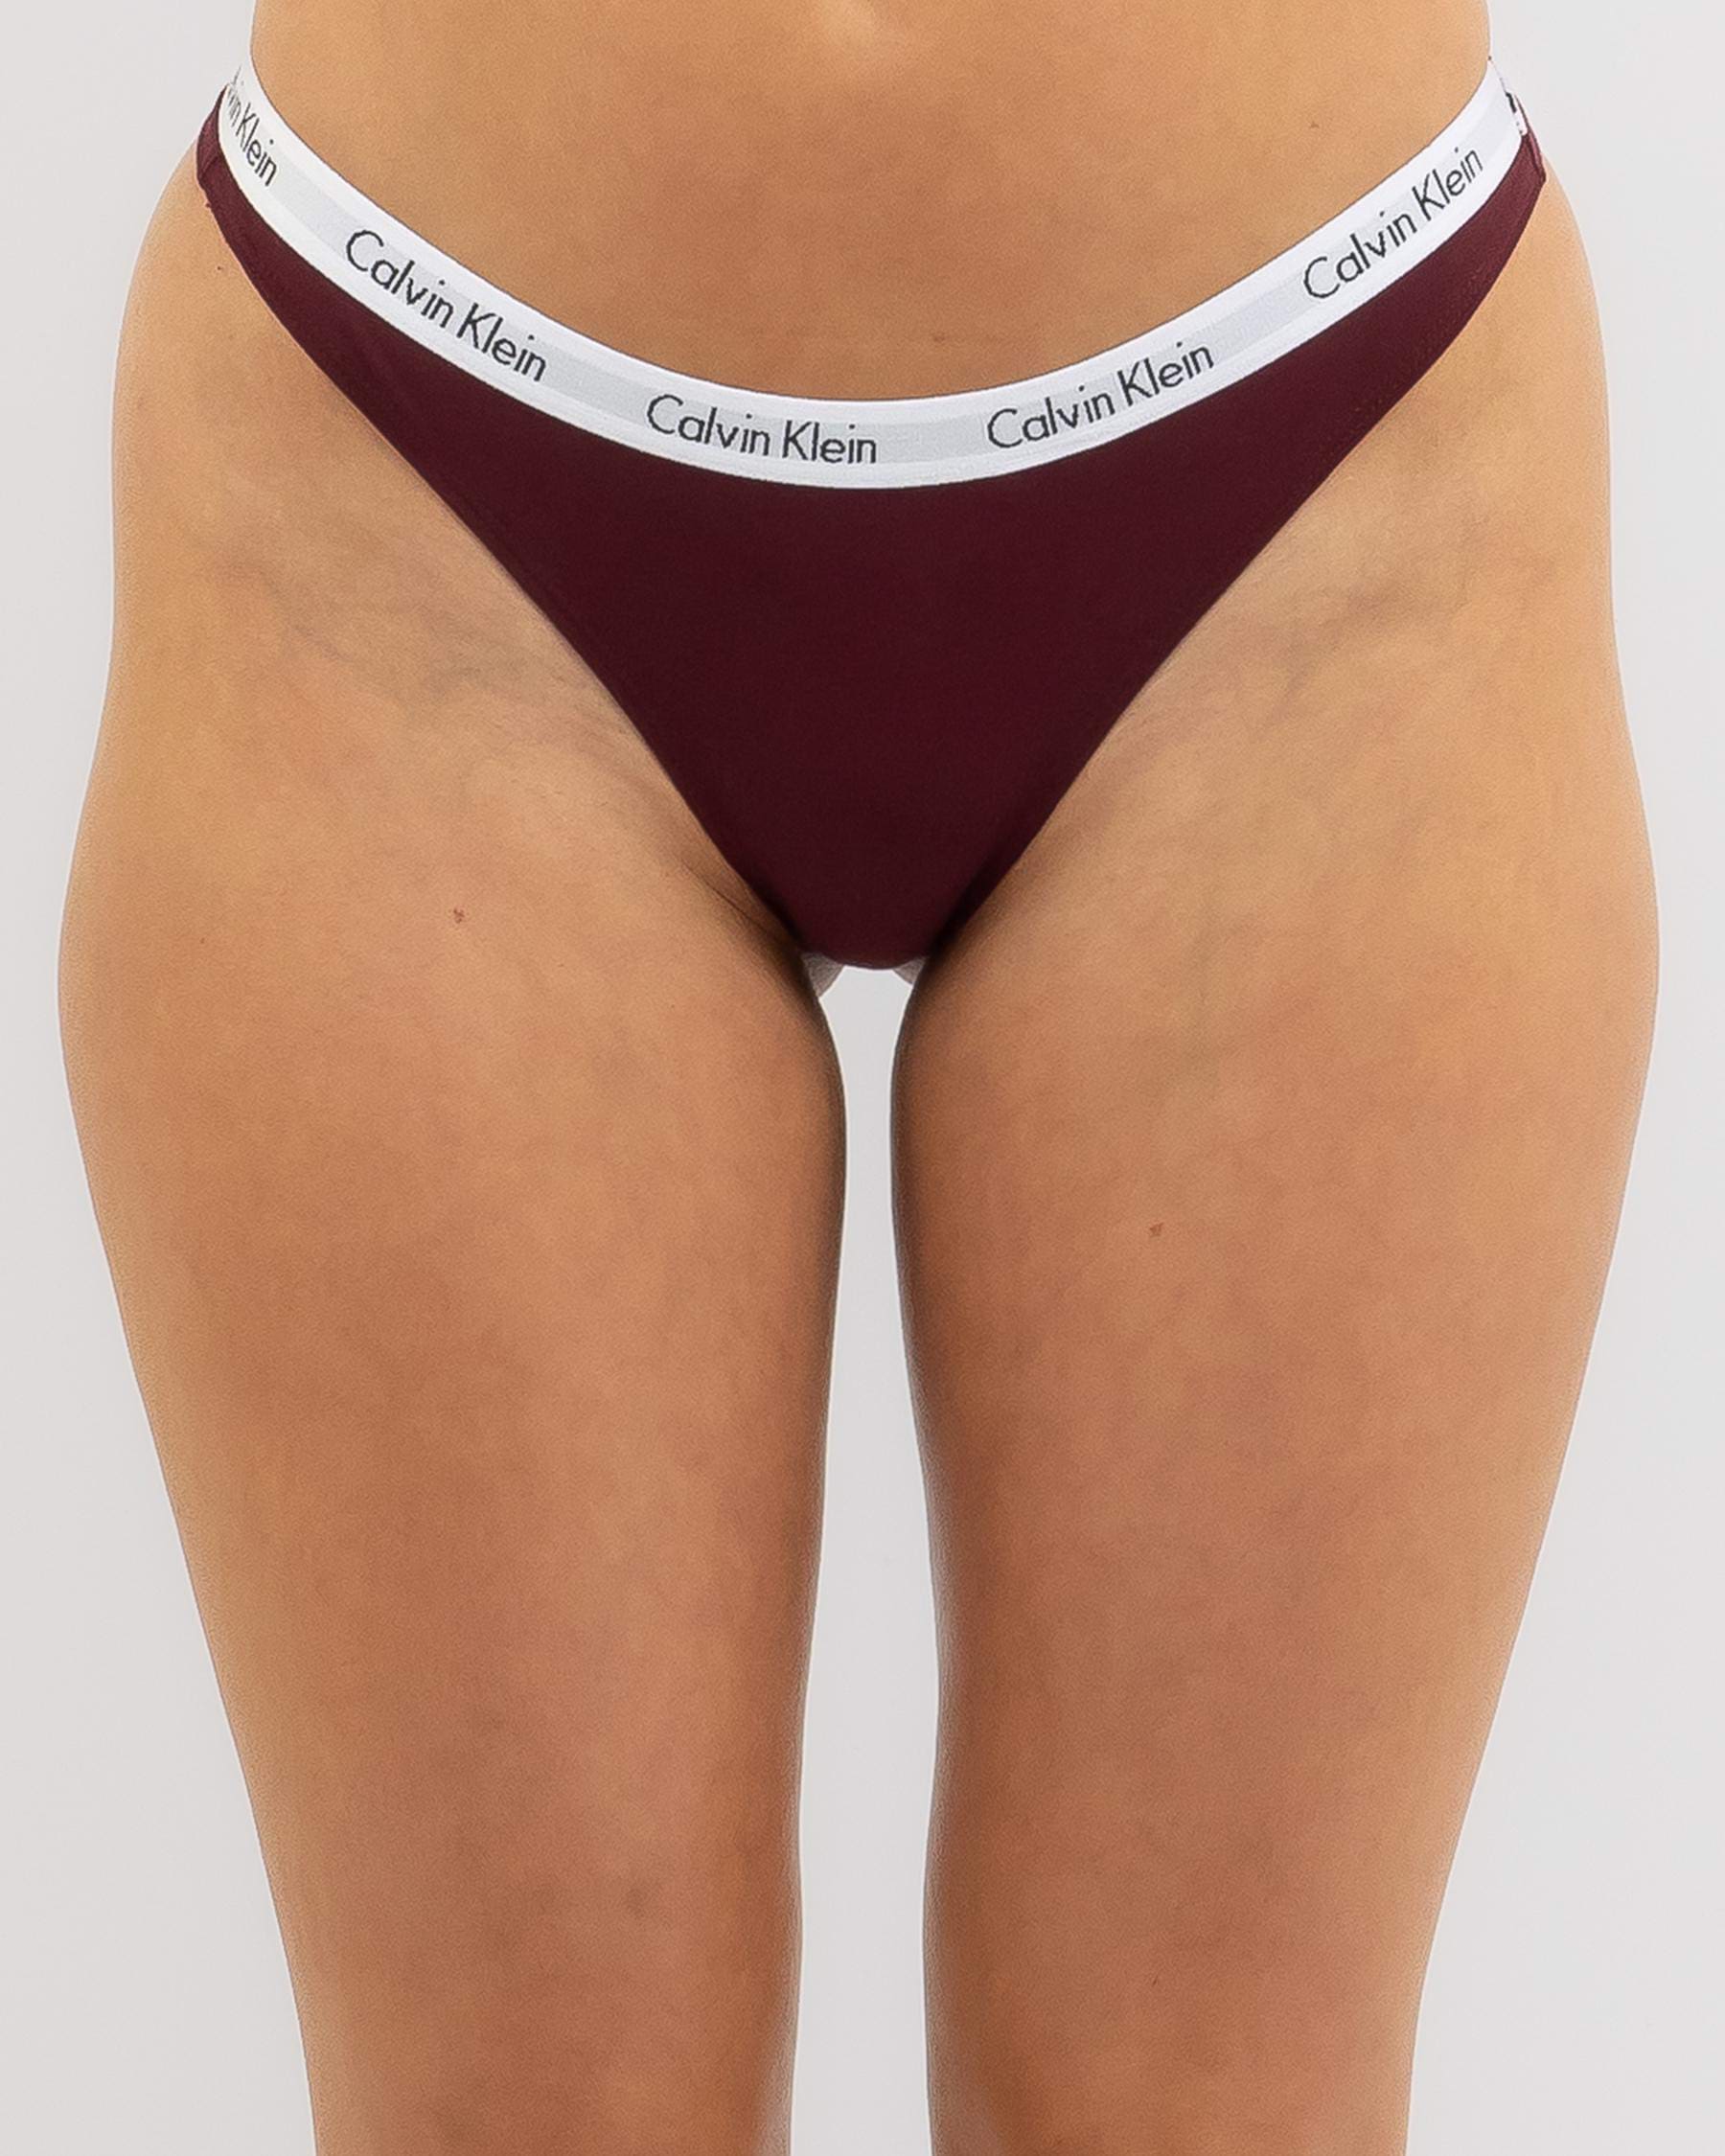 Calvin Klein Carousel Thong In Deep Rouge - FREE* Shipping & Easy